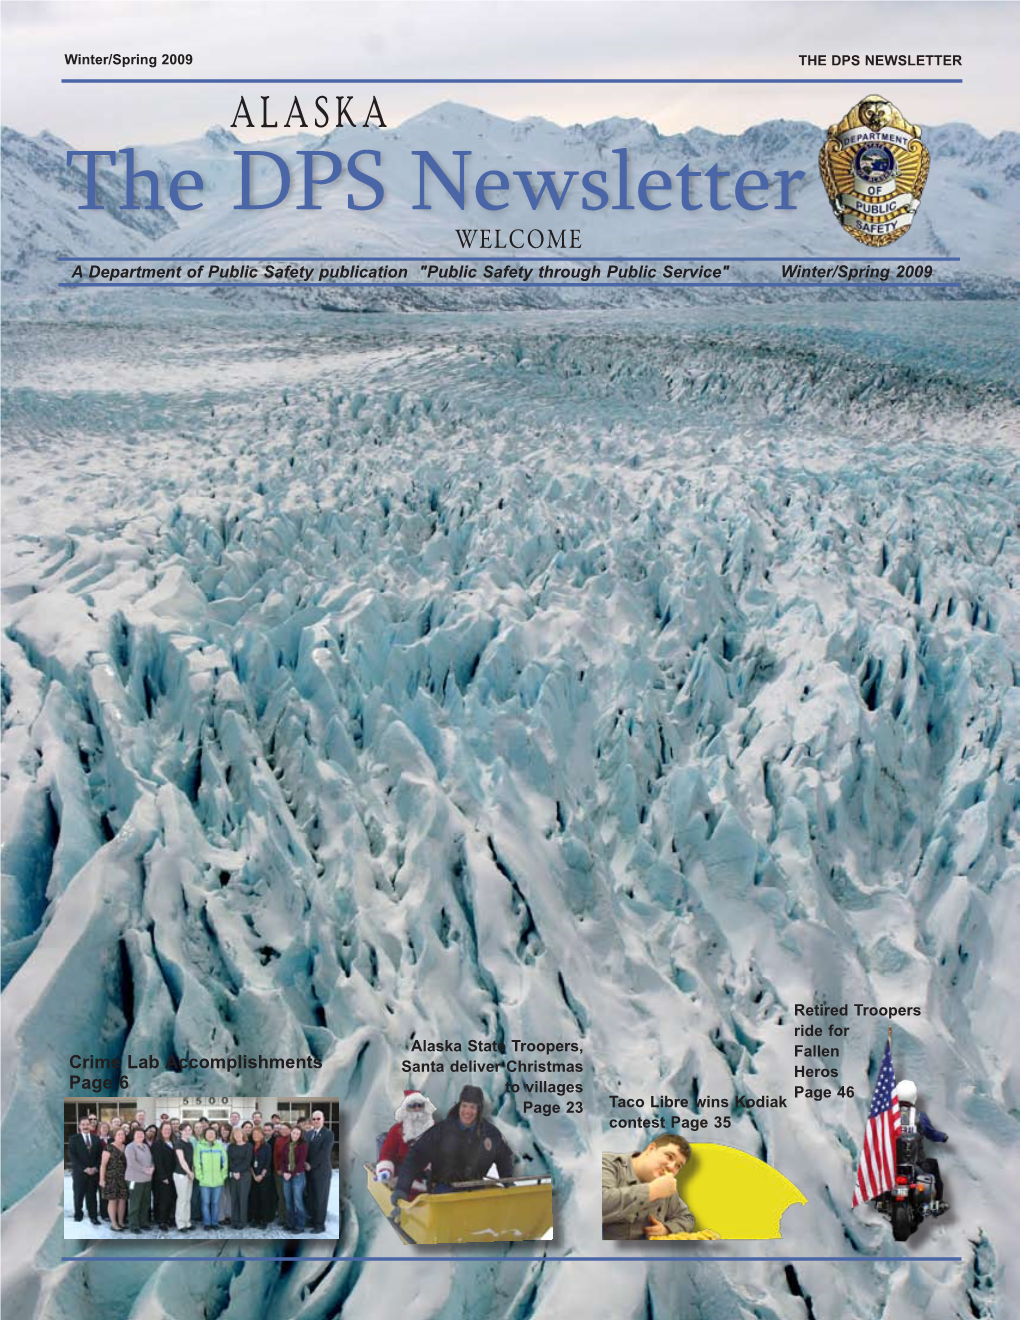 THE DPS NEWSLETTER ALASKA the DPS Newsletter Welcome a Department of Public Safety Publication "Public Safety Through Public Service" Winter/Spring 2009